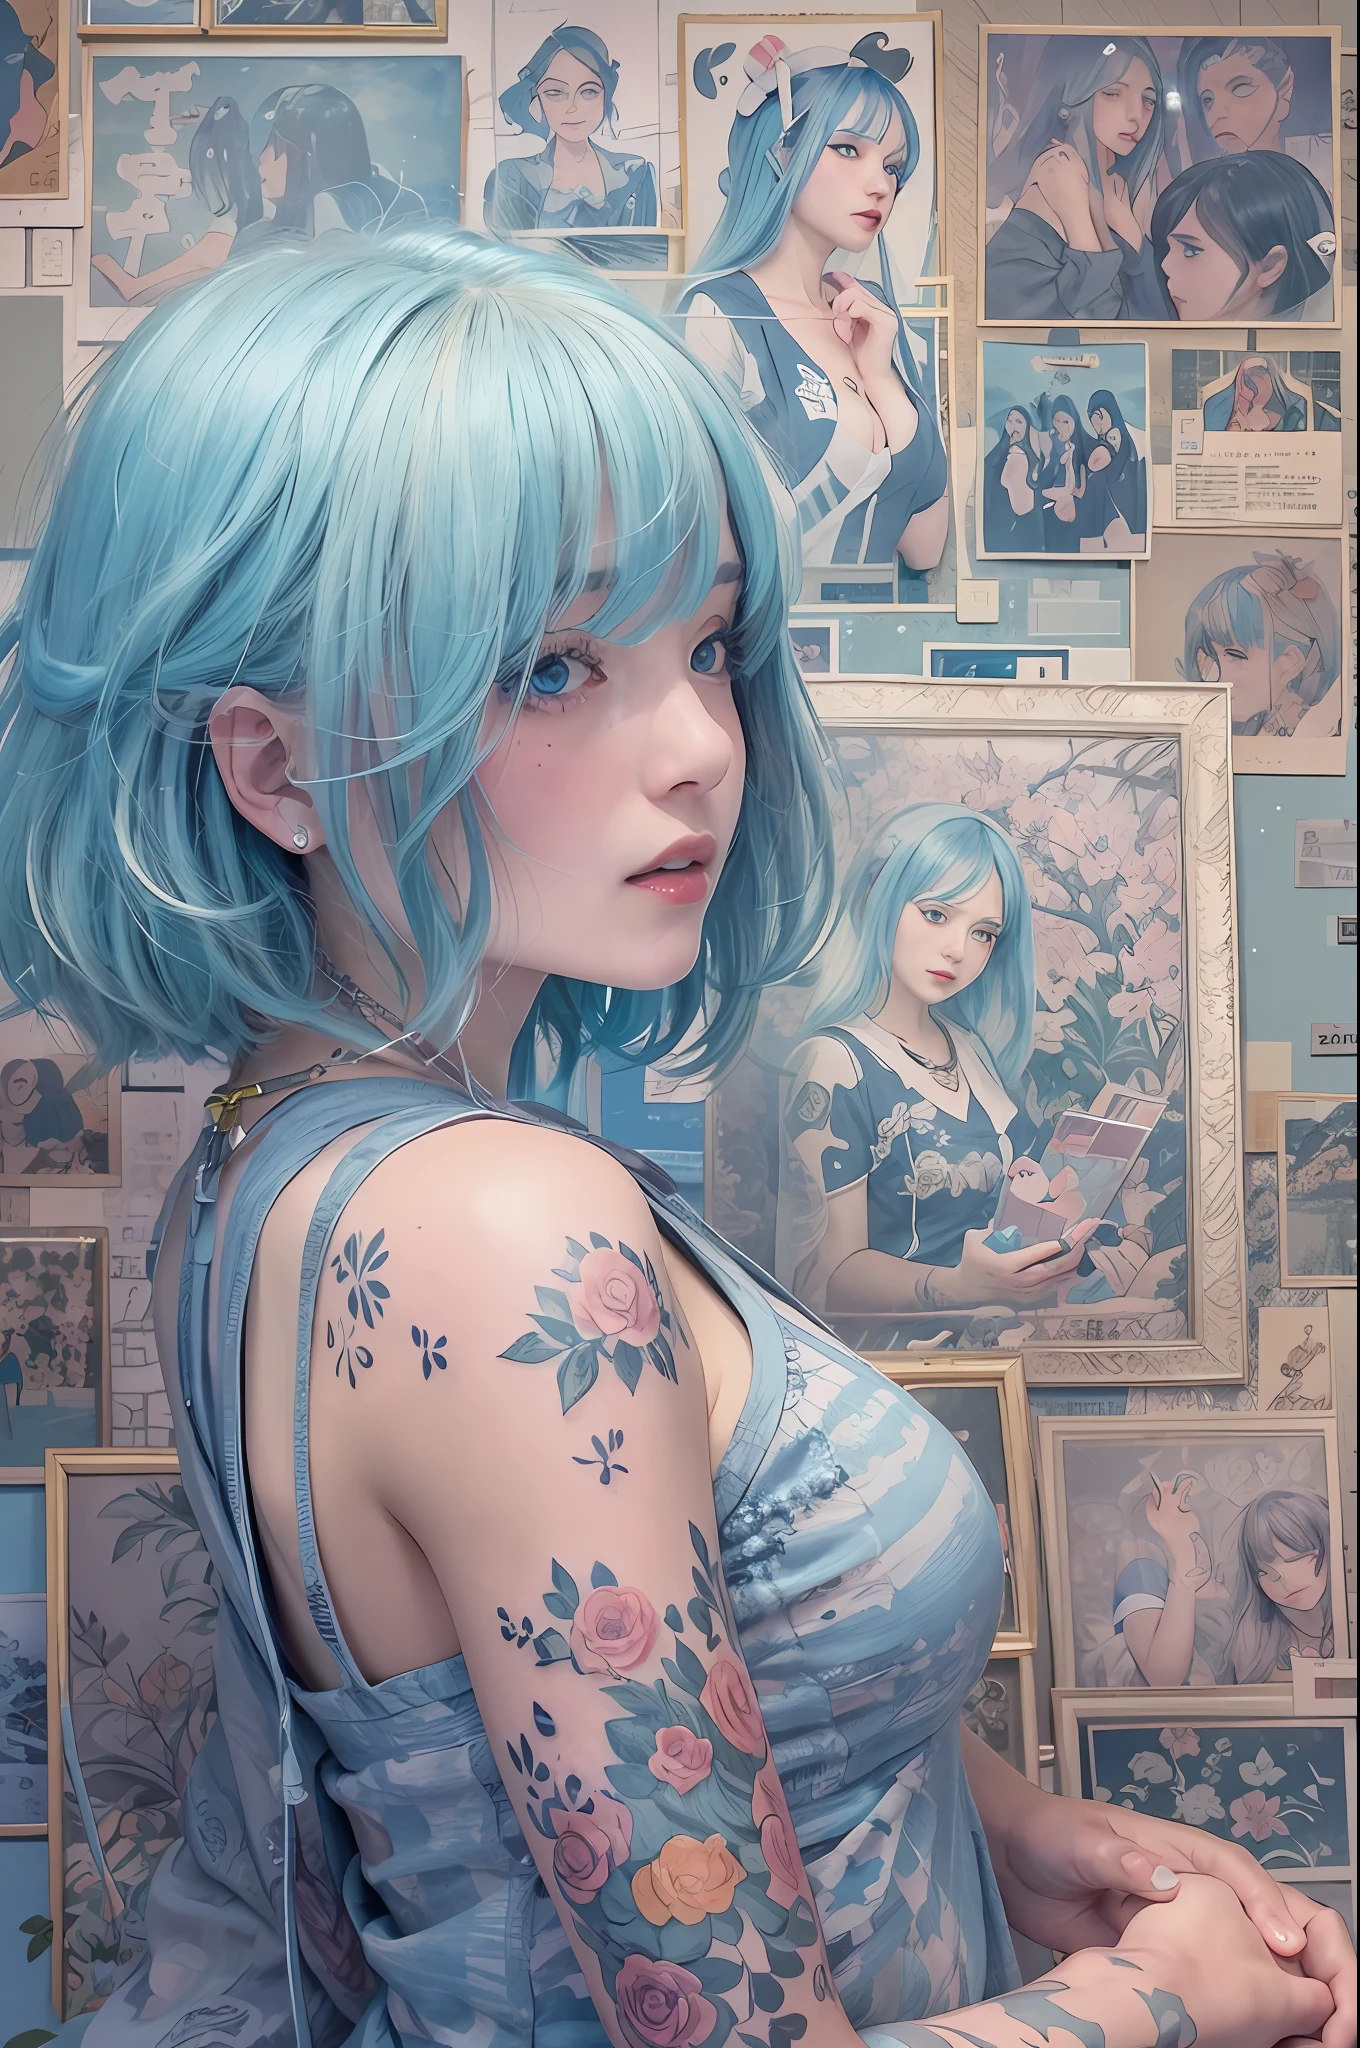 Ultra-high definition 2D art, close-up (1 woman), light blue hair, 2D animation style, soft and delicate depiction, attention also on her full-body tattoos (full-body art), landscape mode, masterpieces by Guweiz and James Jean, tattoo expert designs by CGSCOSITY, etc. A beautiful blue-haired girl who became a hot topic at the trend art station of Japan.